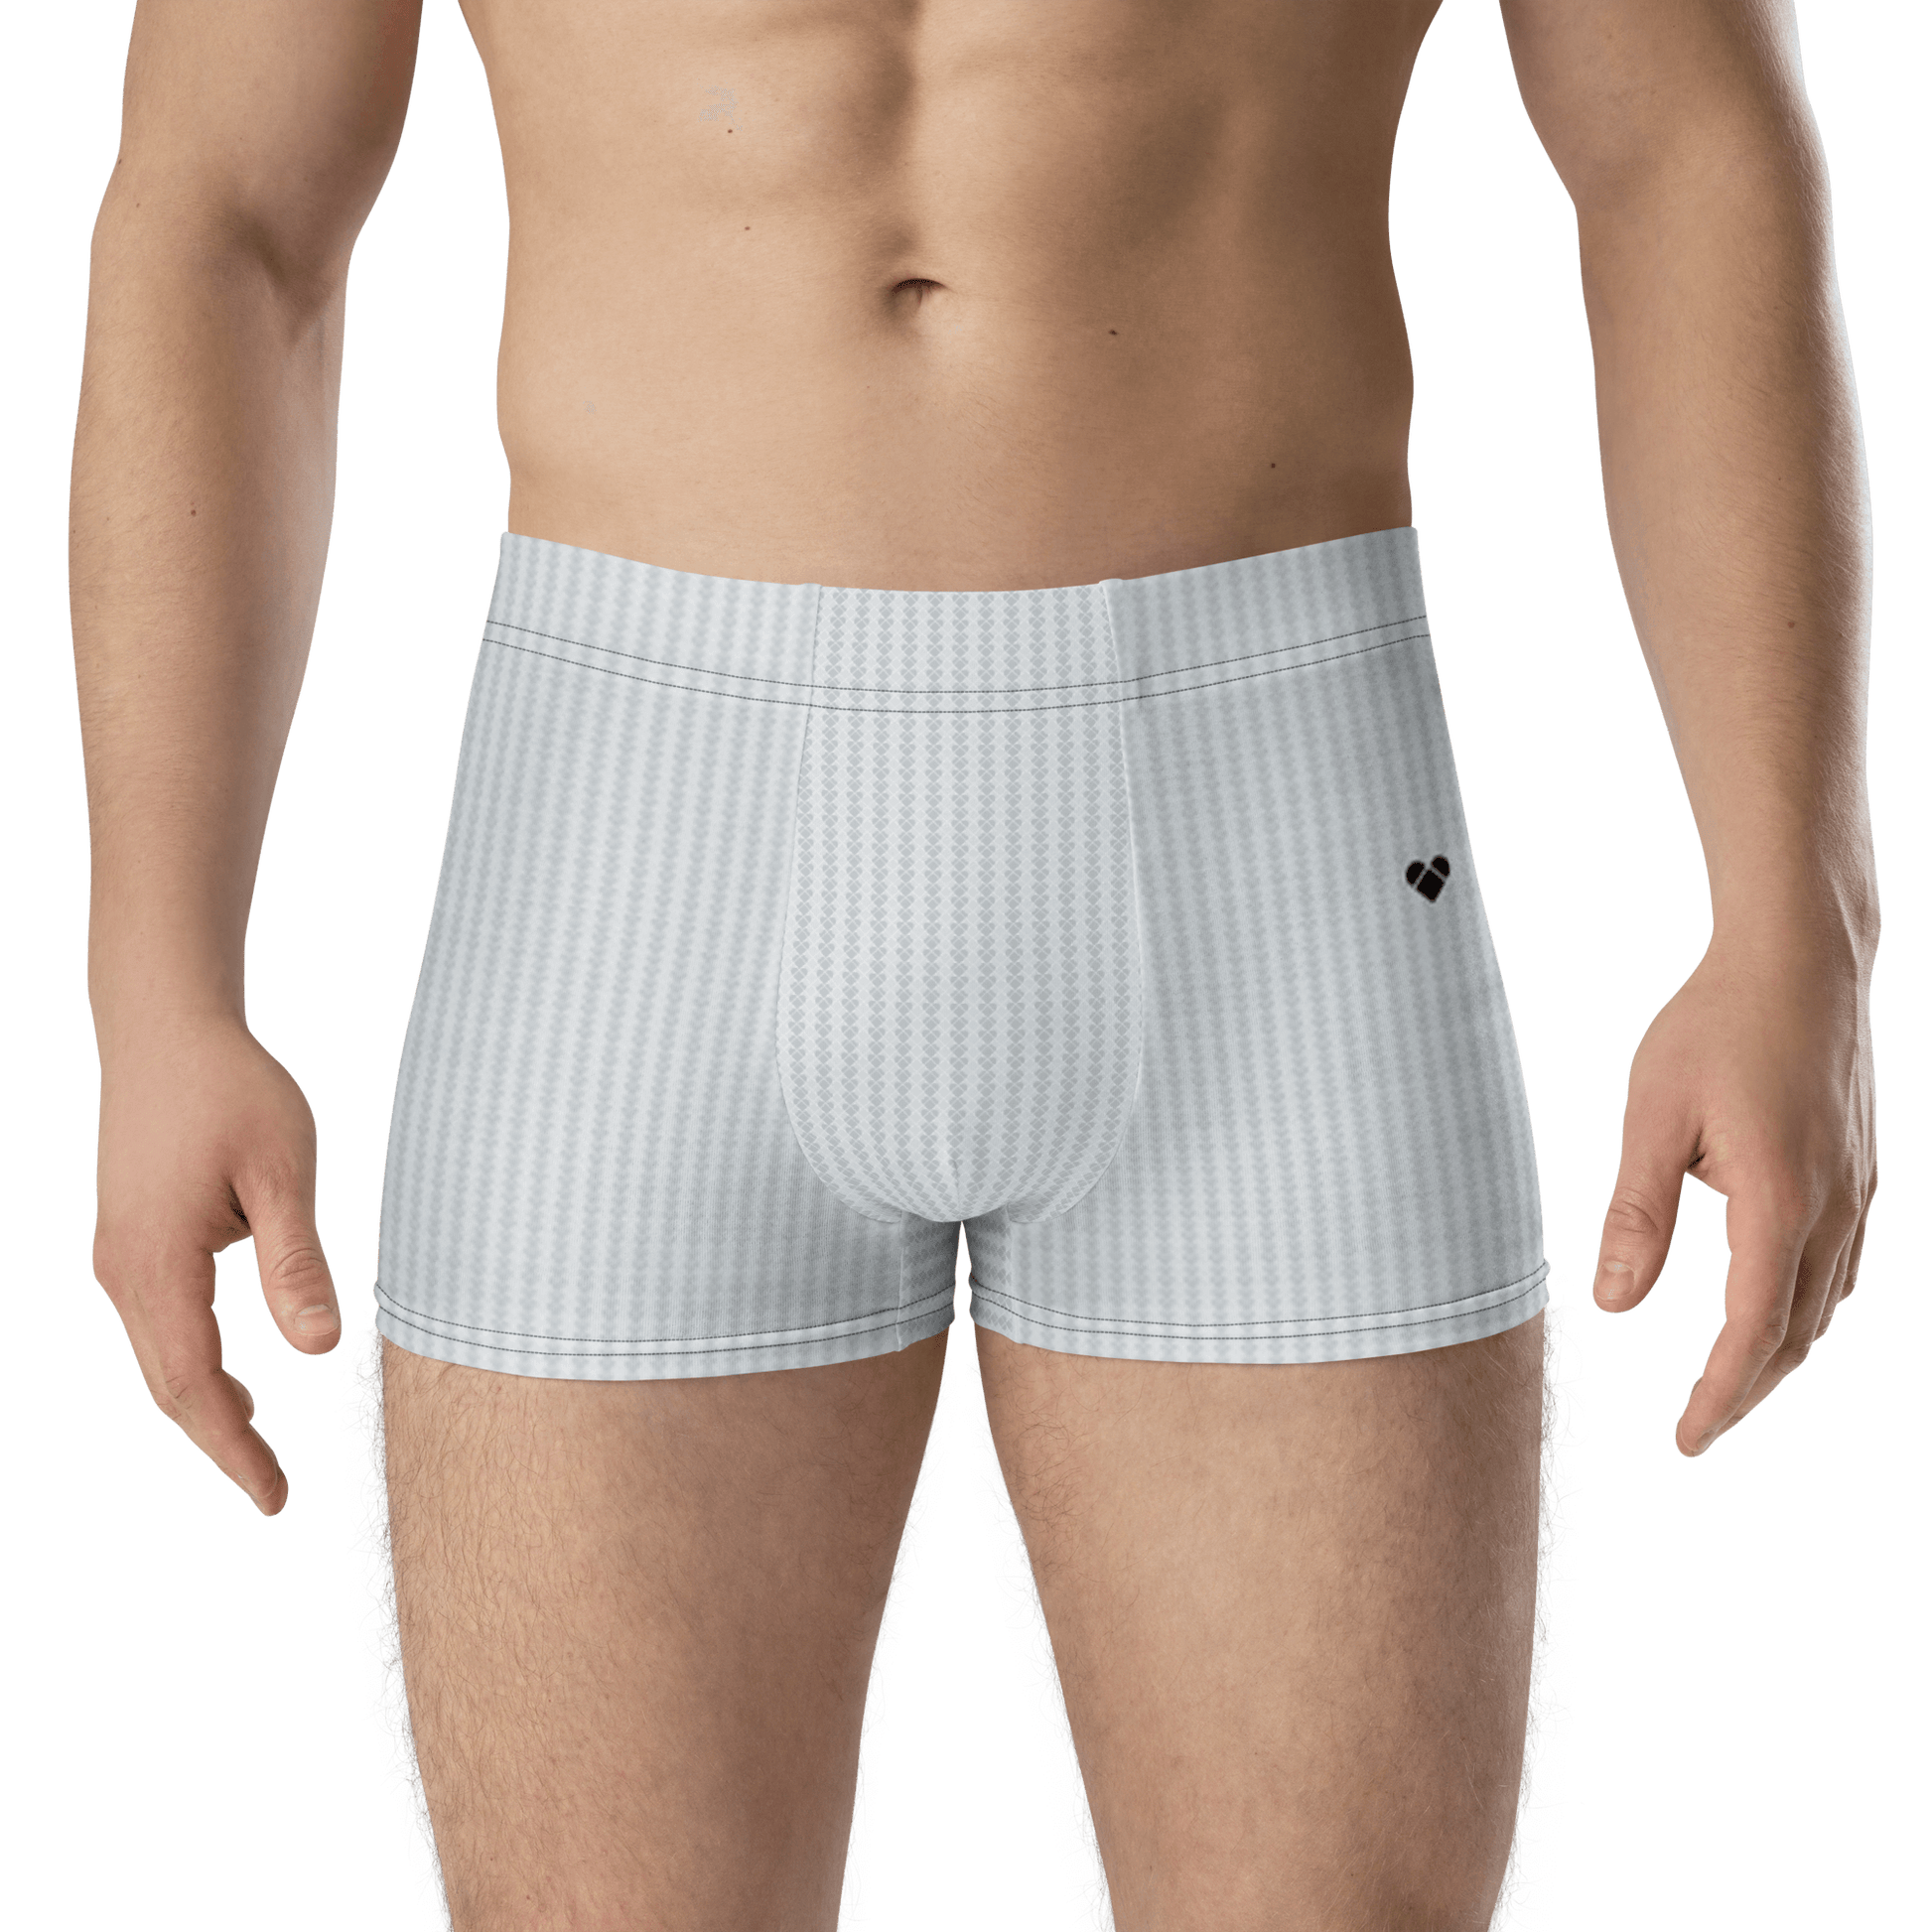 Comfy Boxers - Light Gray Lovogram Boxers from CRiZ AMOR